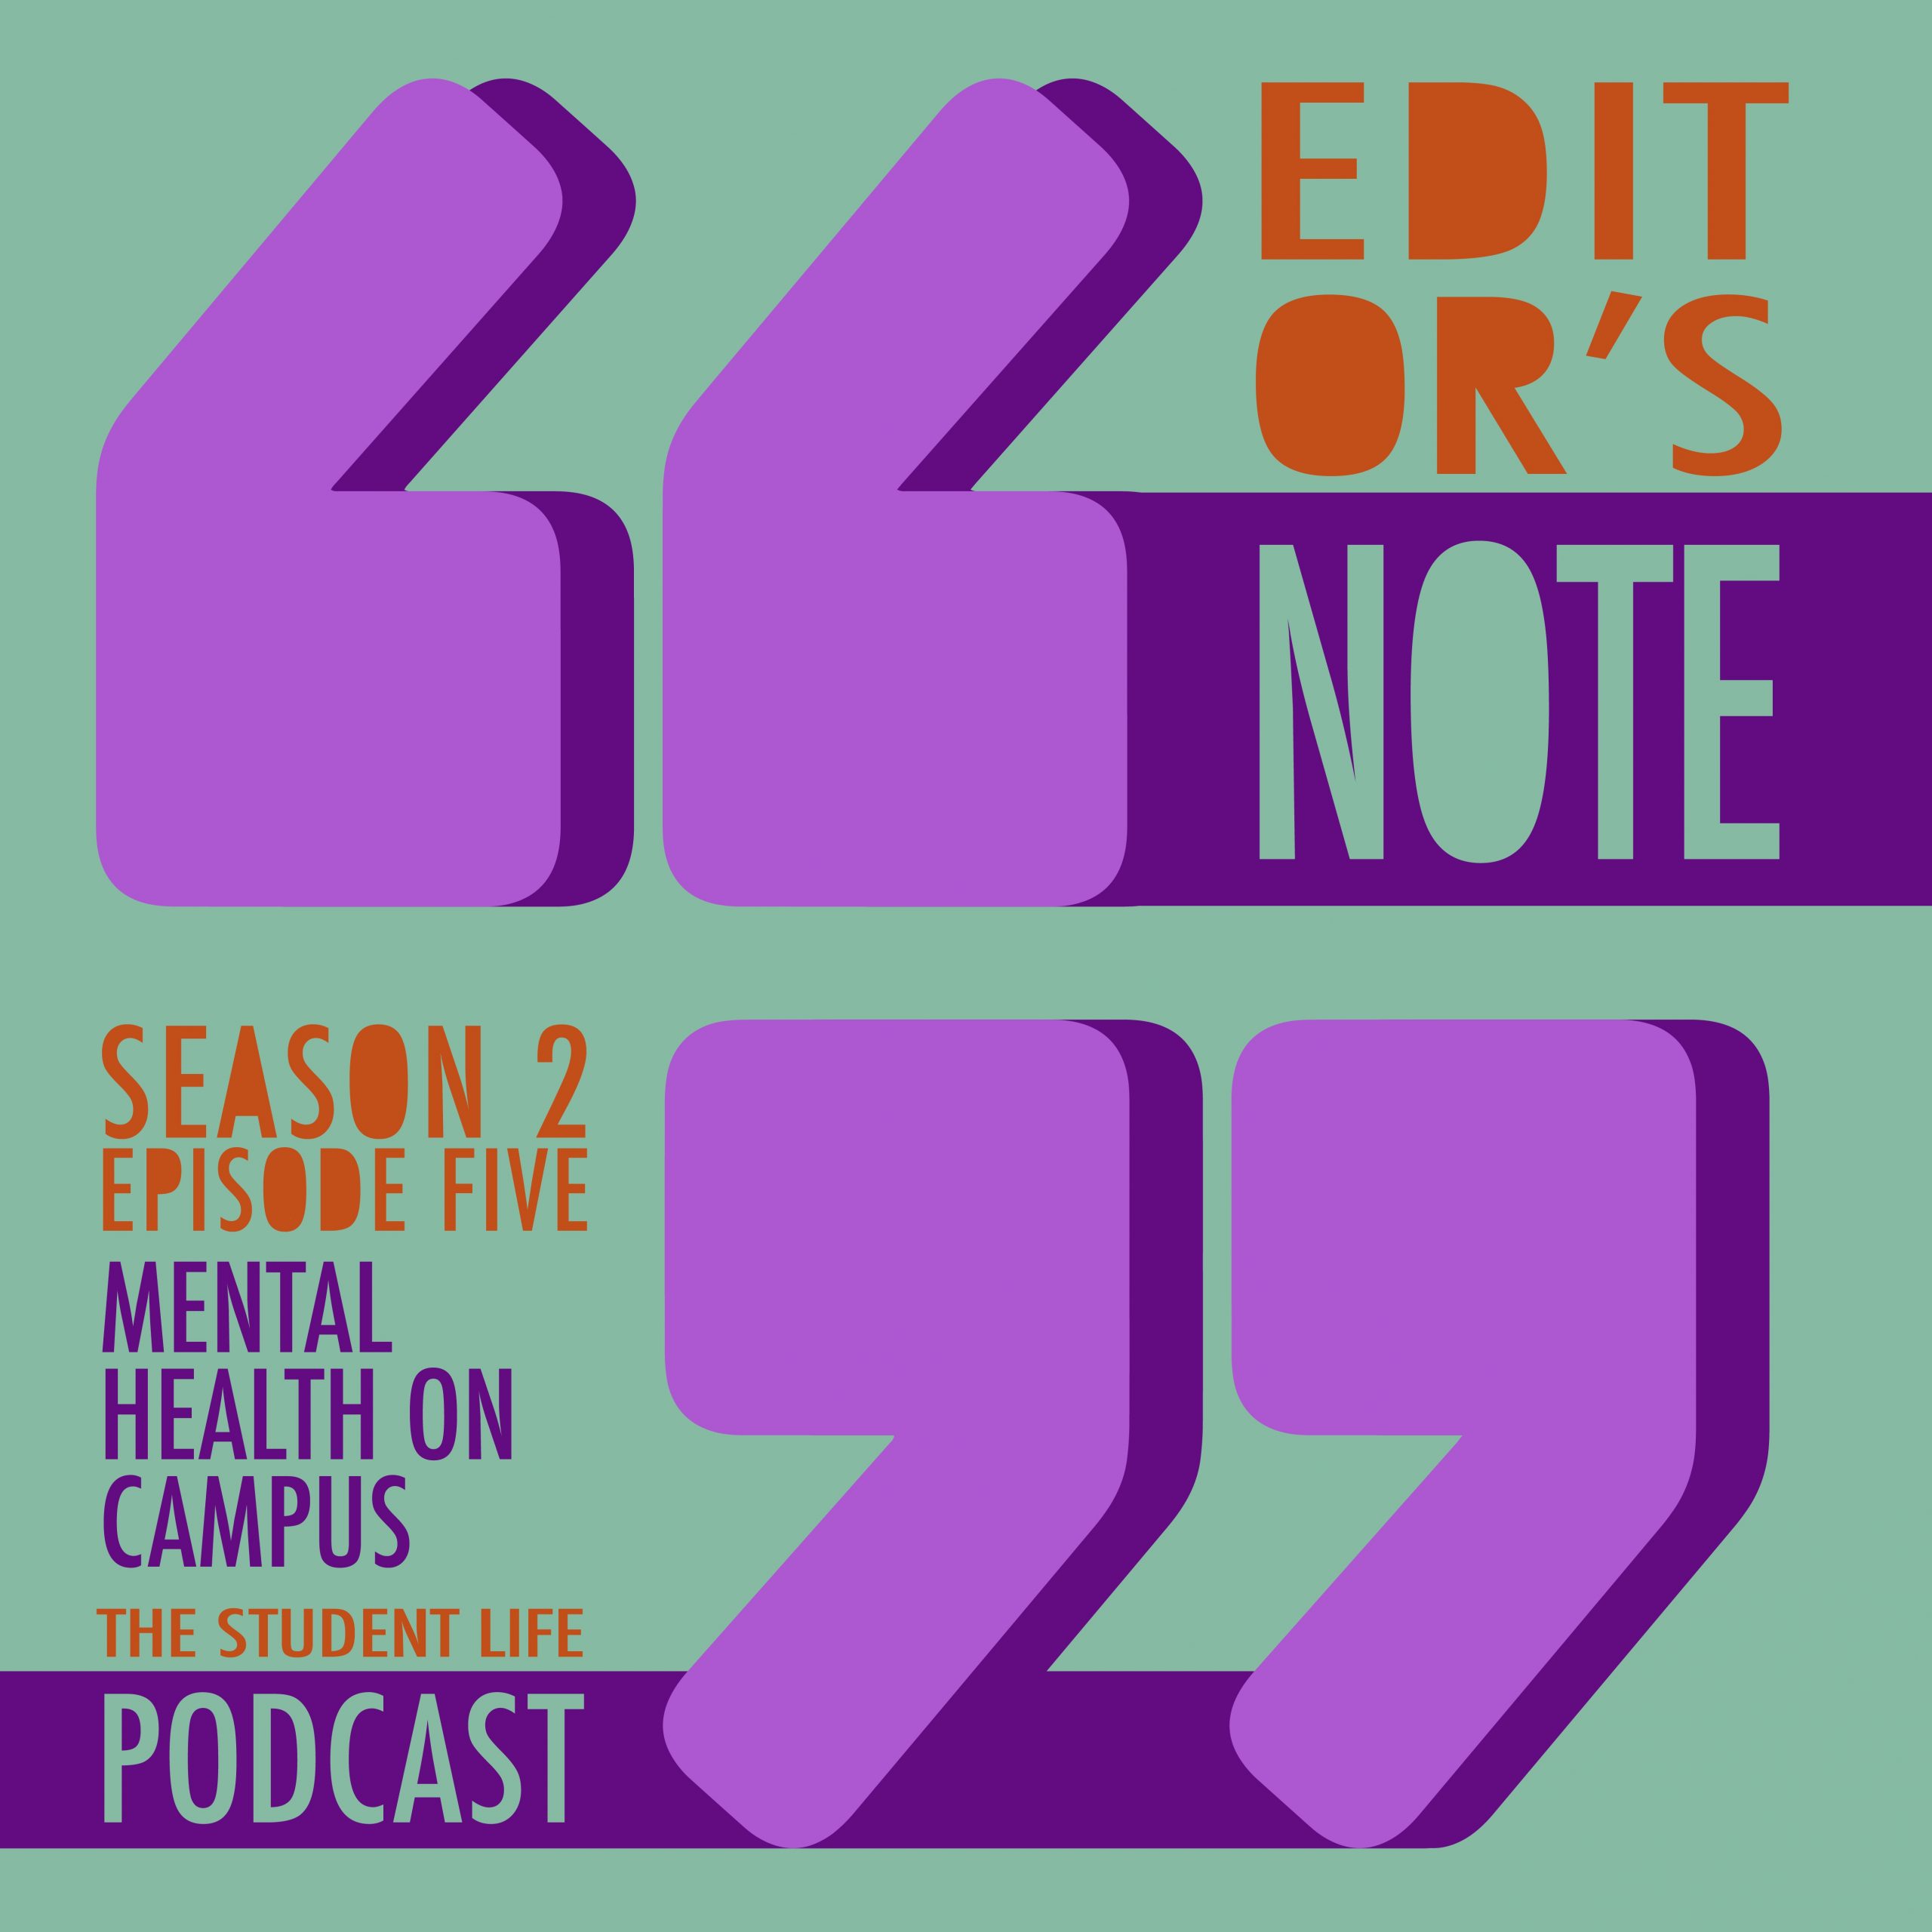 A graphic with two large purple quotation marks in the center in front of a lime green background. In the upper right hand corner, orange and green letters read "Editor's Note." In the lower left hand corner, purple and green letters read "Season 2 Episode Five Mental health on campus" and "The Student Life Podcast"